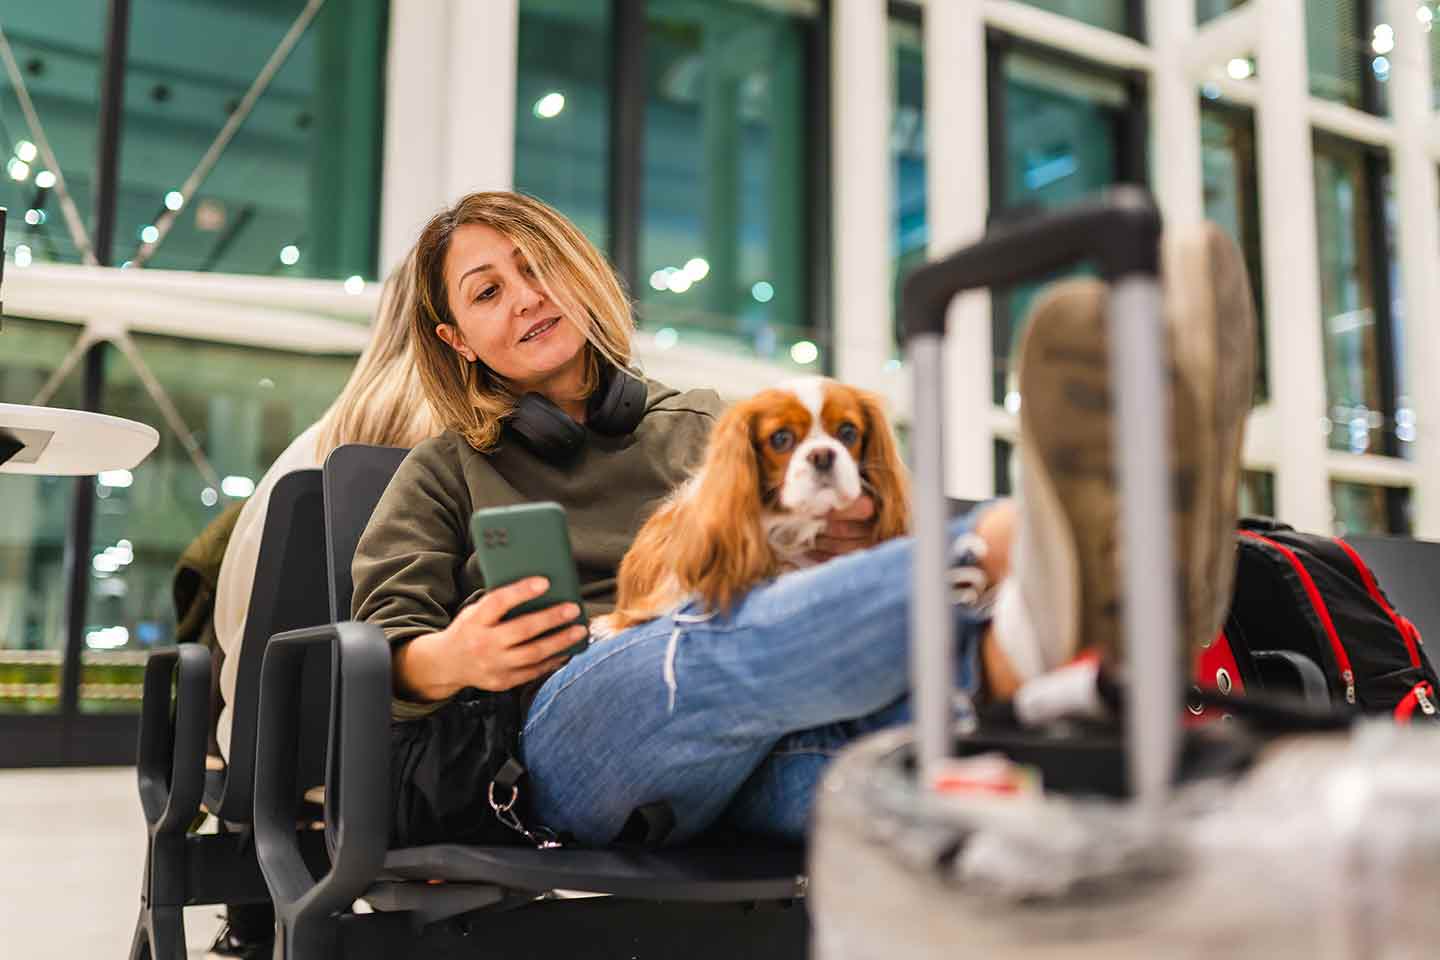 Photo of a woman and her dog sitting in an airport